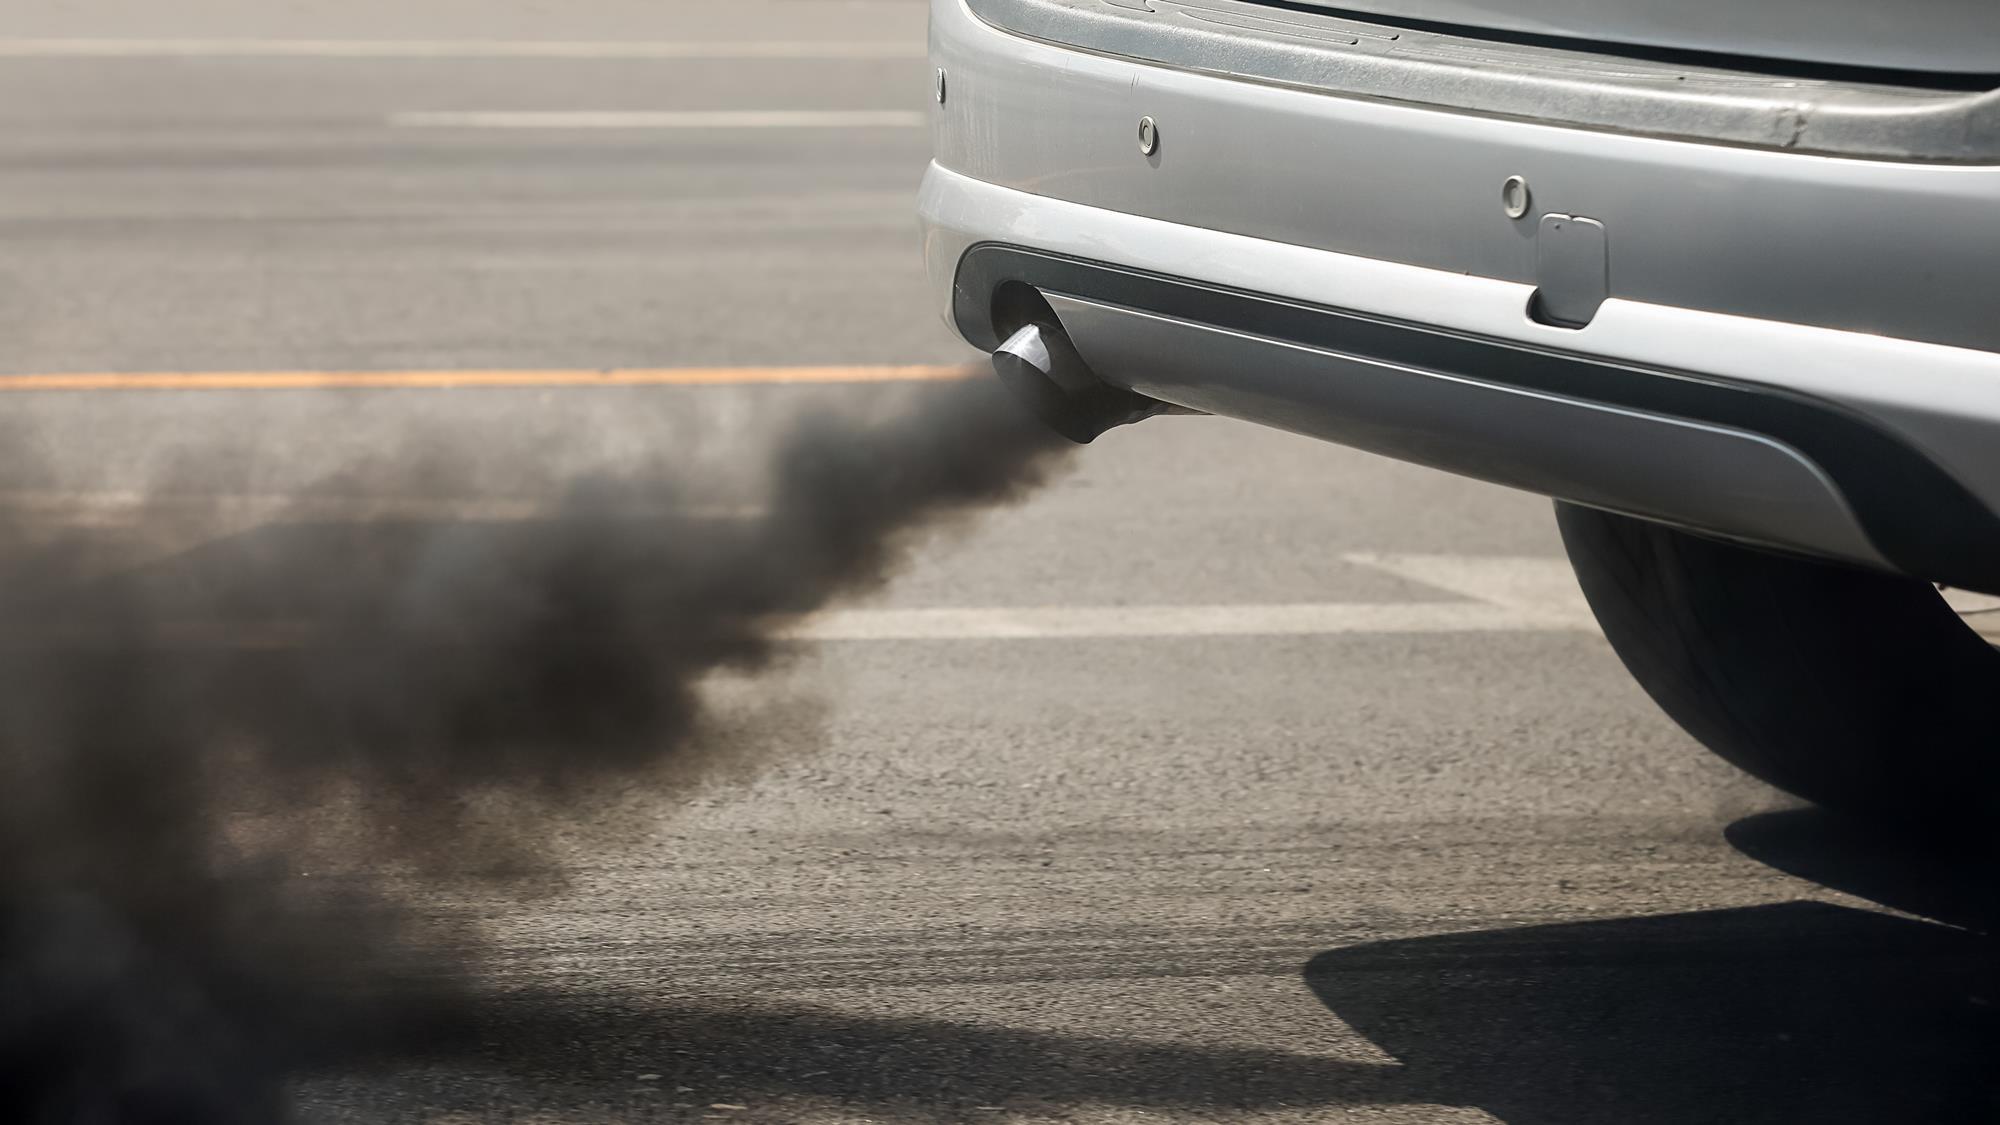 What is a car's exhaust?